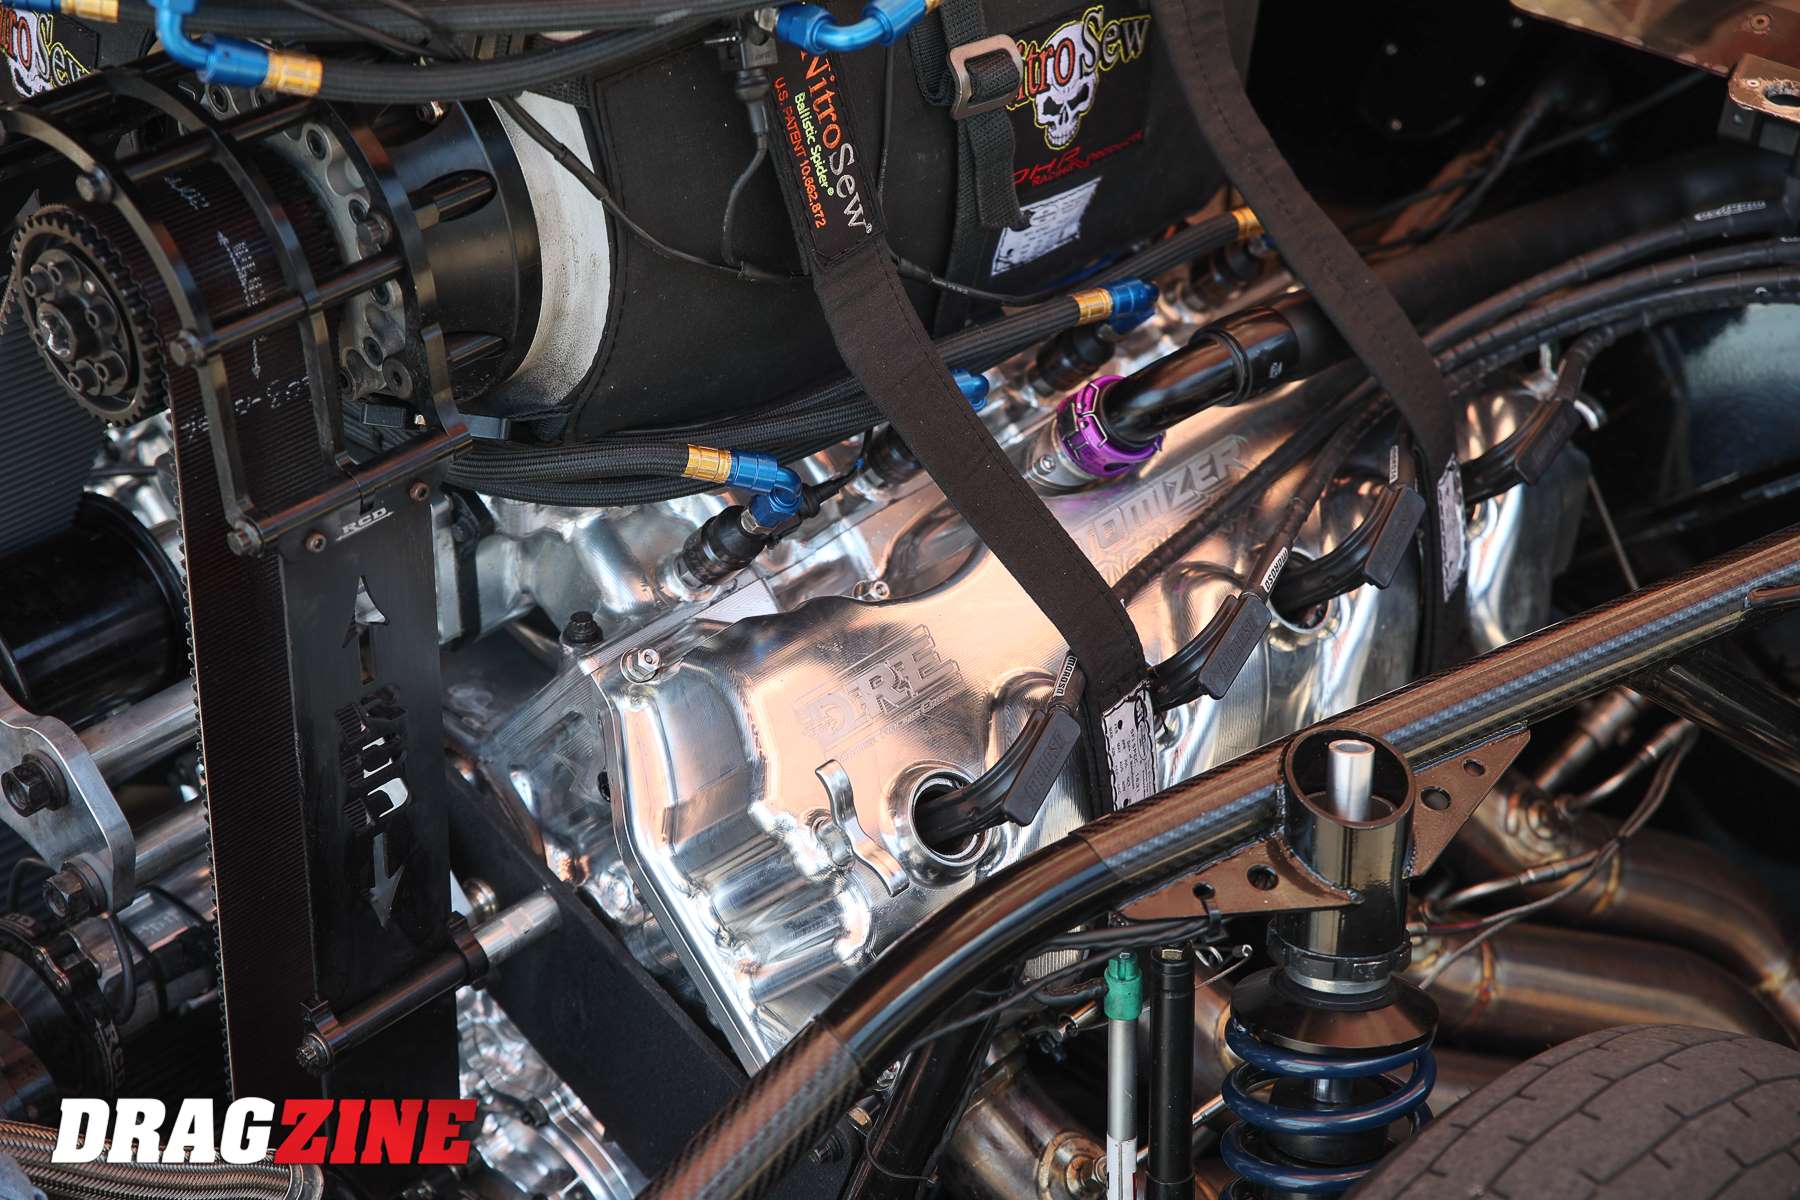 Dragzine: Featured Article! "Jack French, Bruders Fuel Results With New Dodge Stratus In NPK"